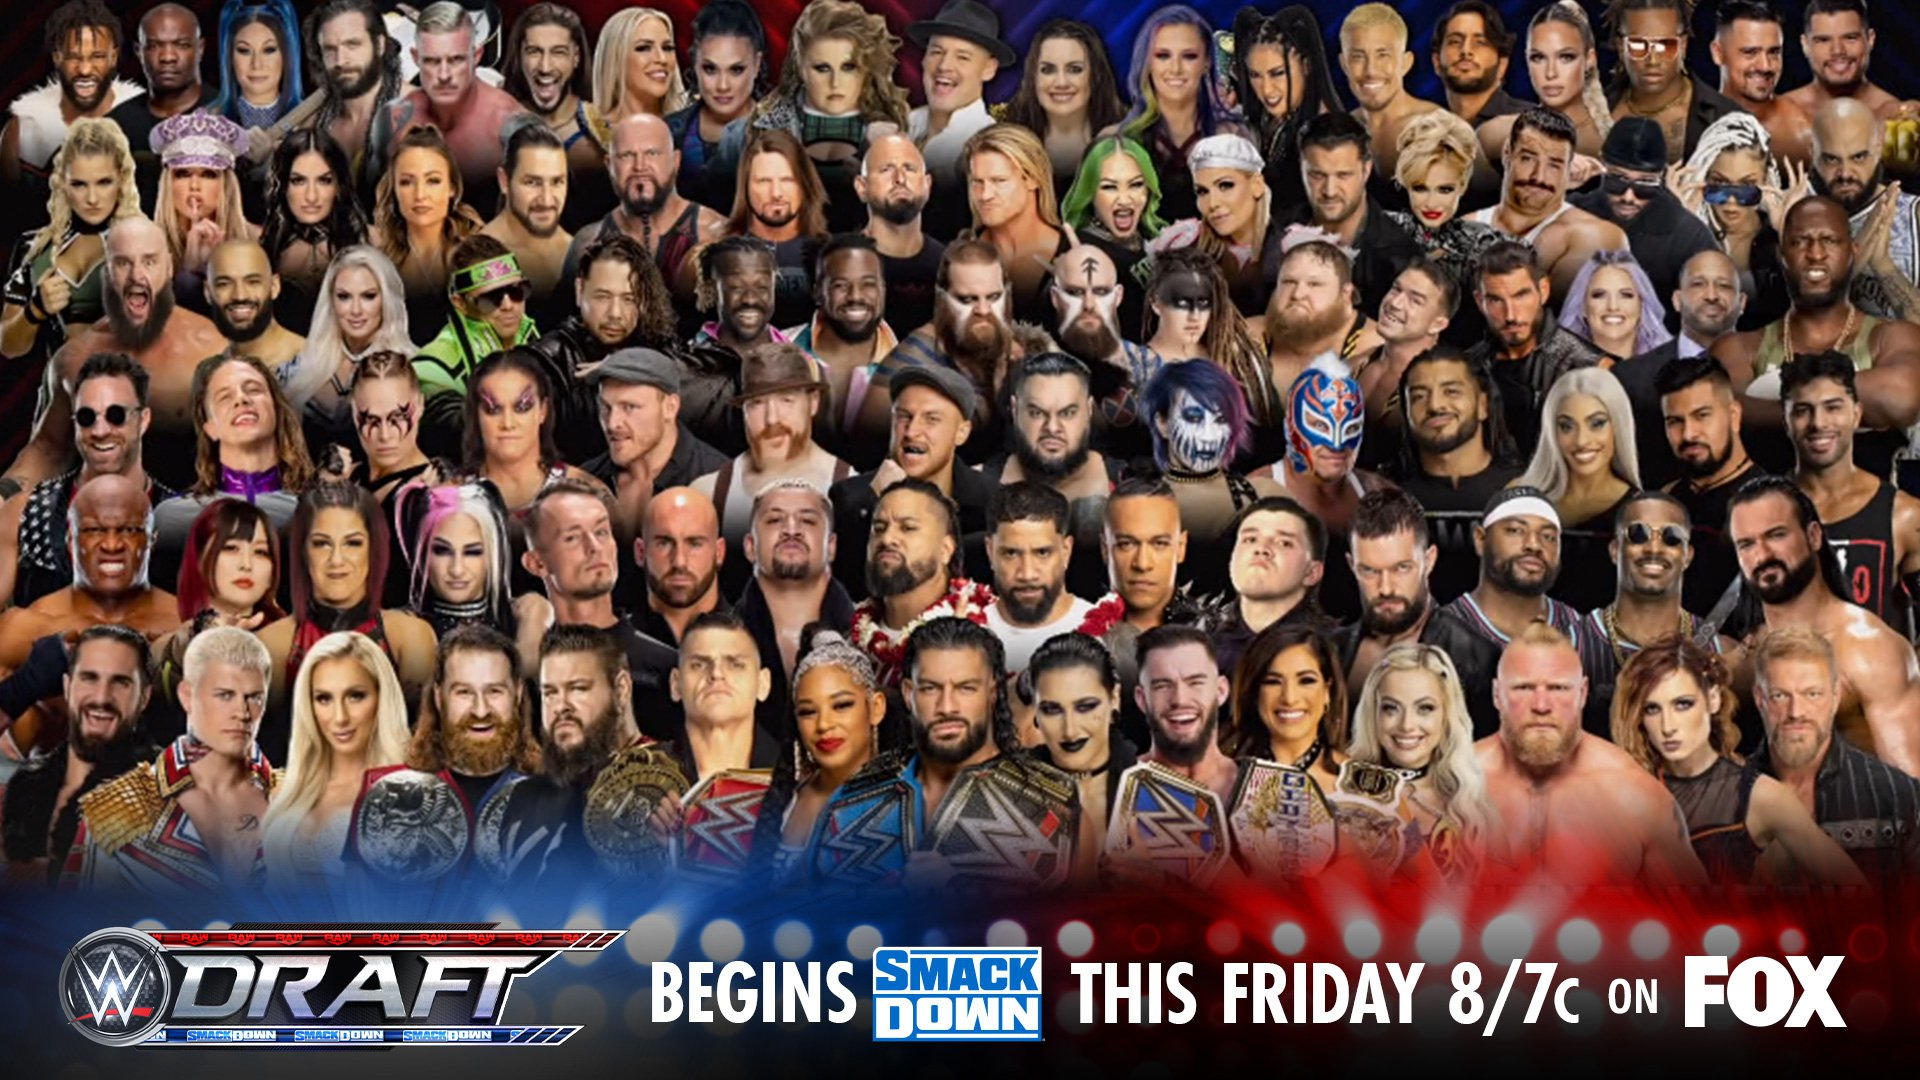 WWE SmackDown Preview for Tonight Night 1 of the WWE Draft, Big Title